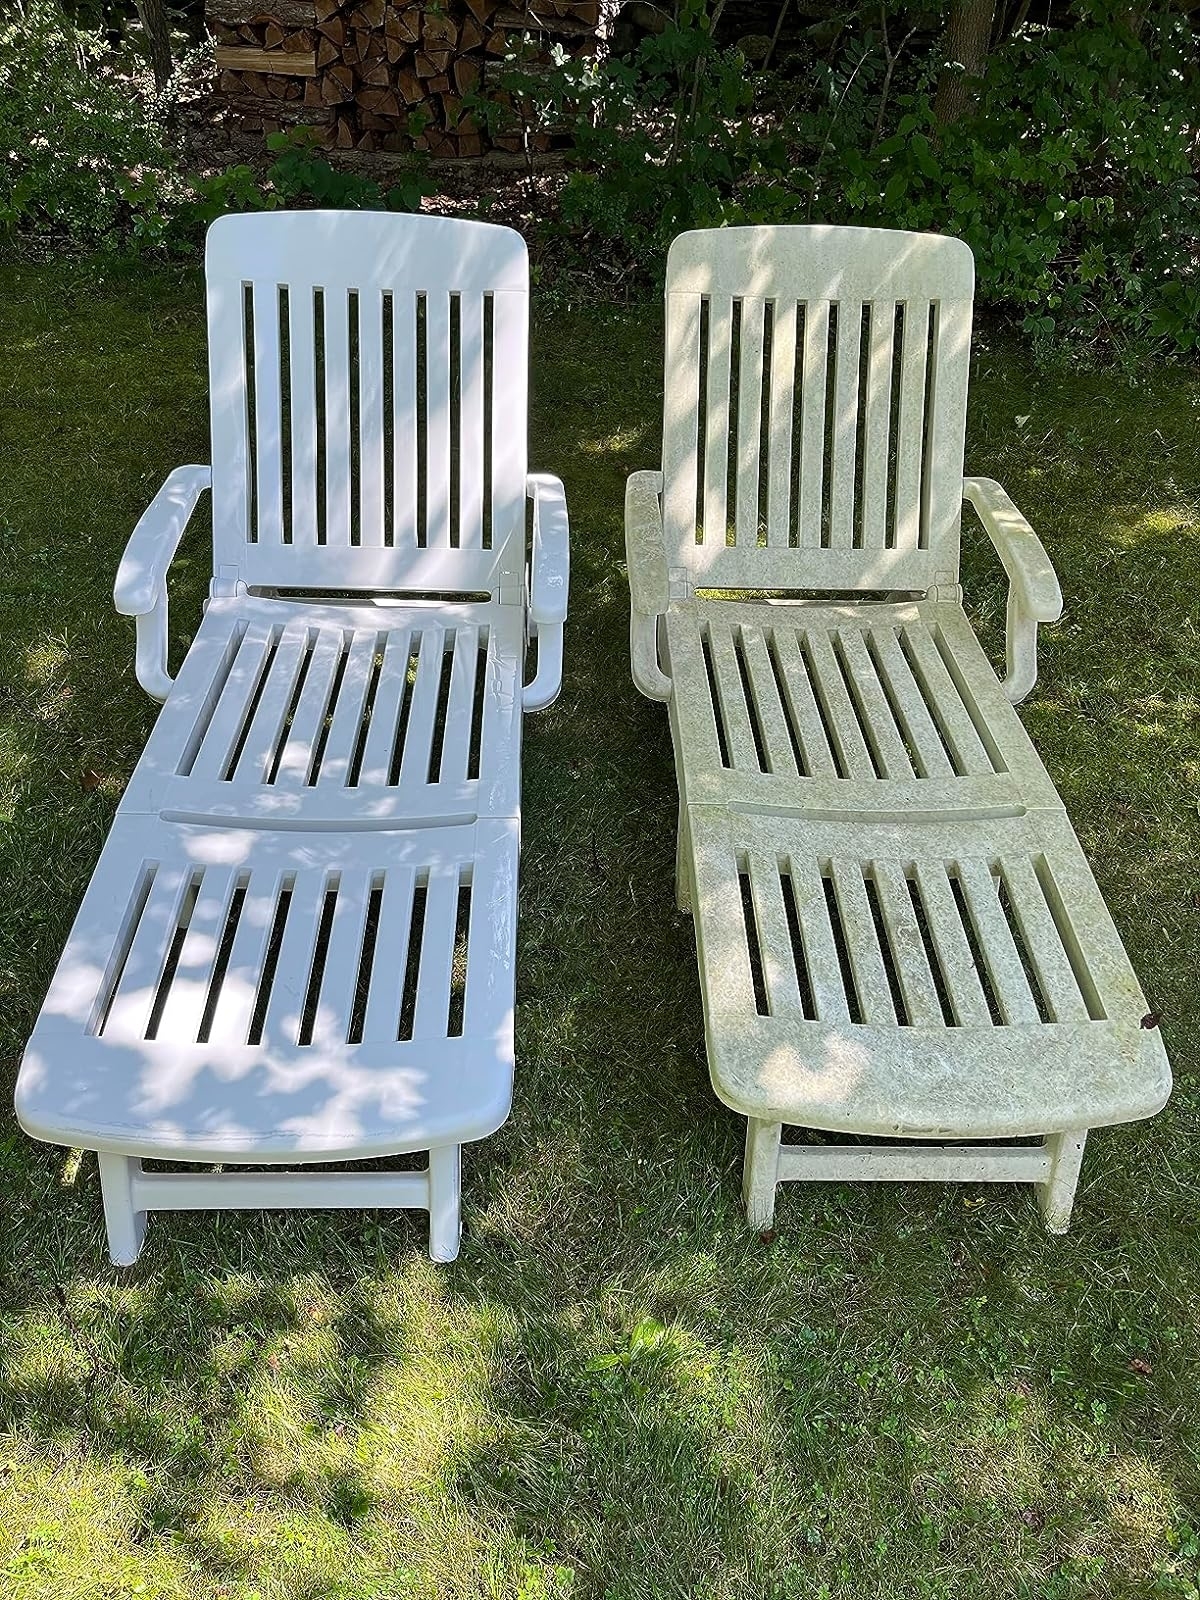 Reviewer image of two loungers, one cleaned with pressure washer and the other dirty